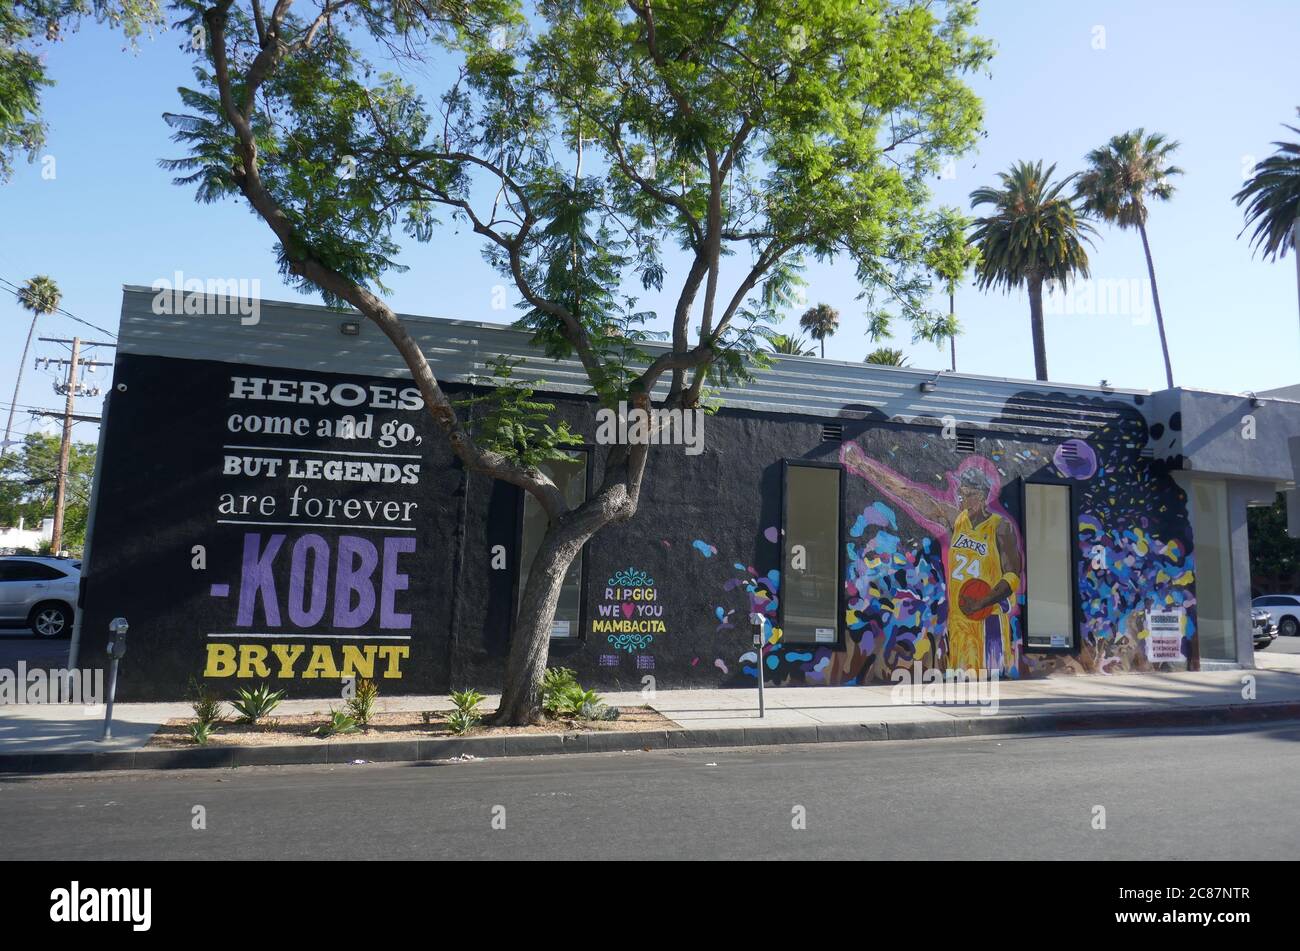 Los Angeles, California, USA  21st July 2020 A general view of atmosphere of Kobe Bryant and Gigi Bryant Street Mural Art during Coronavirus Covid-19 Pandemic on July 21, 2020 in Los Angeles, California, USA. Photo by Barry King/Alamy Stock Photo Stock Photo